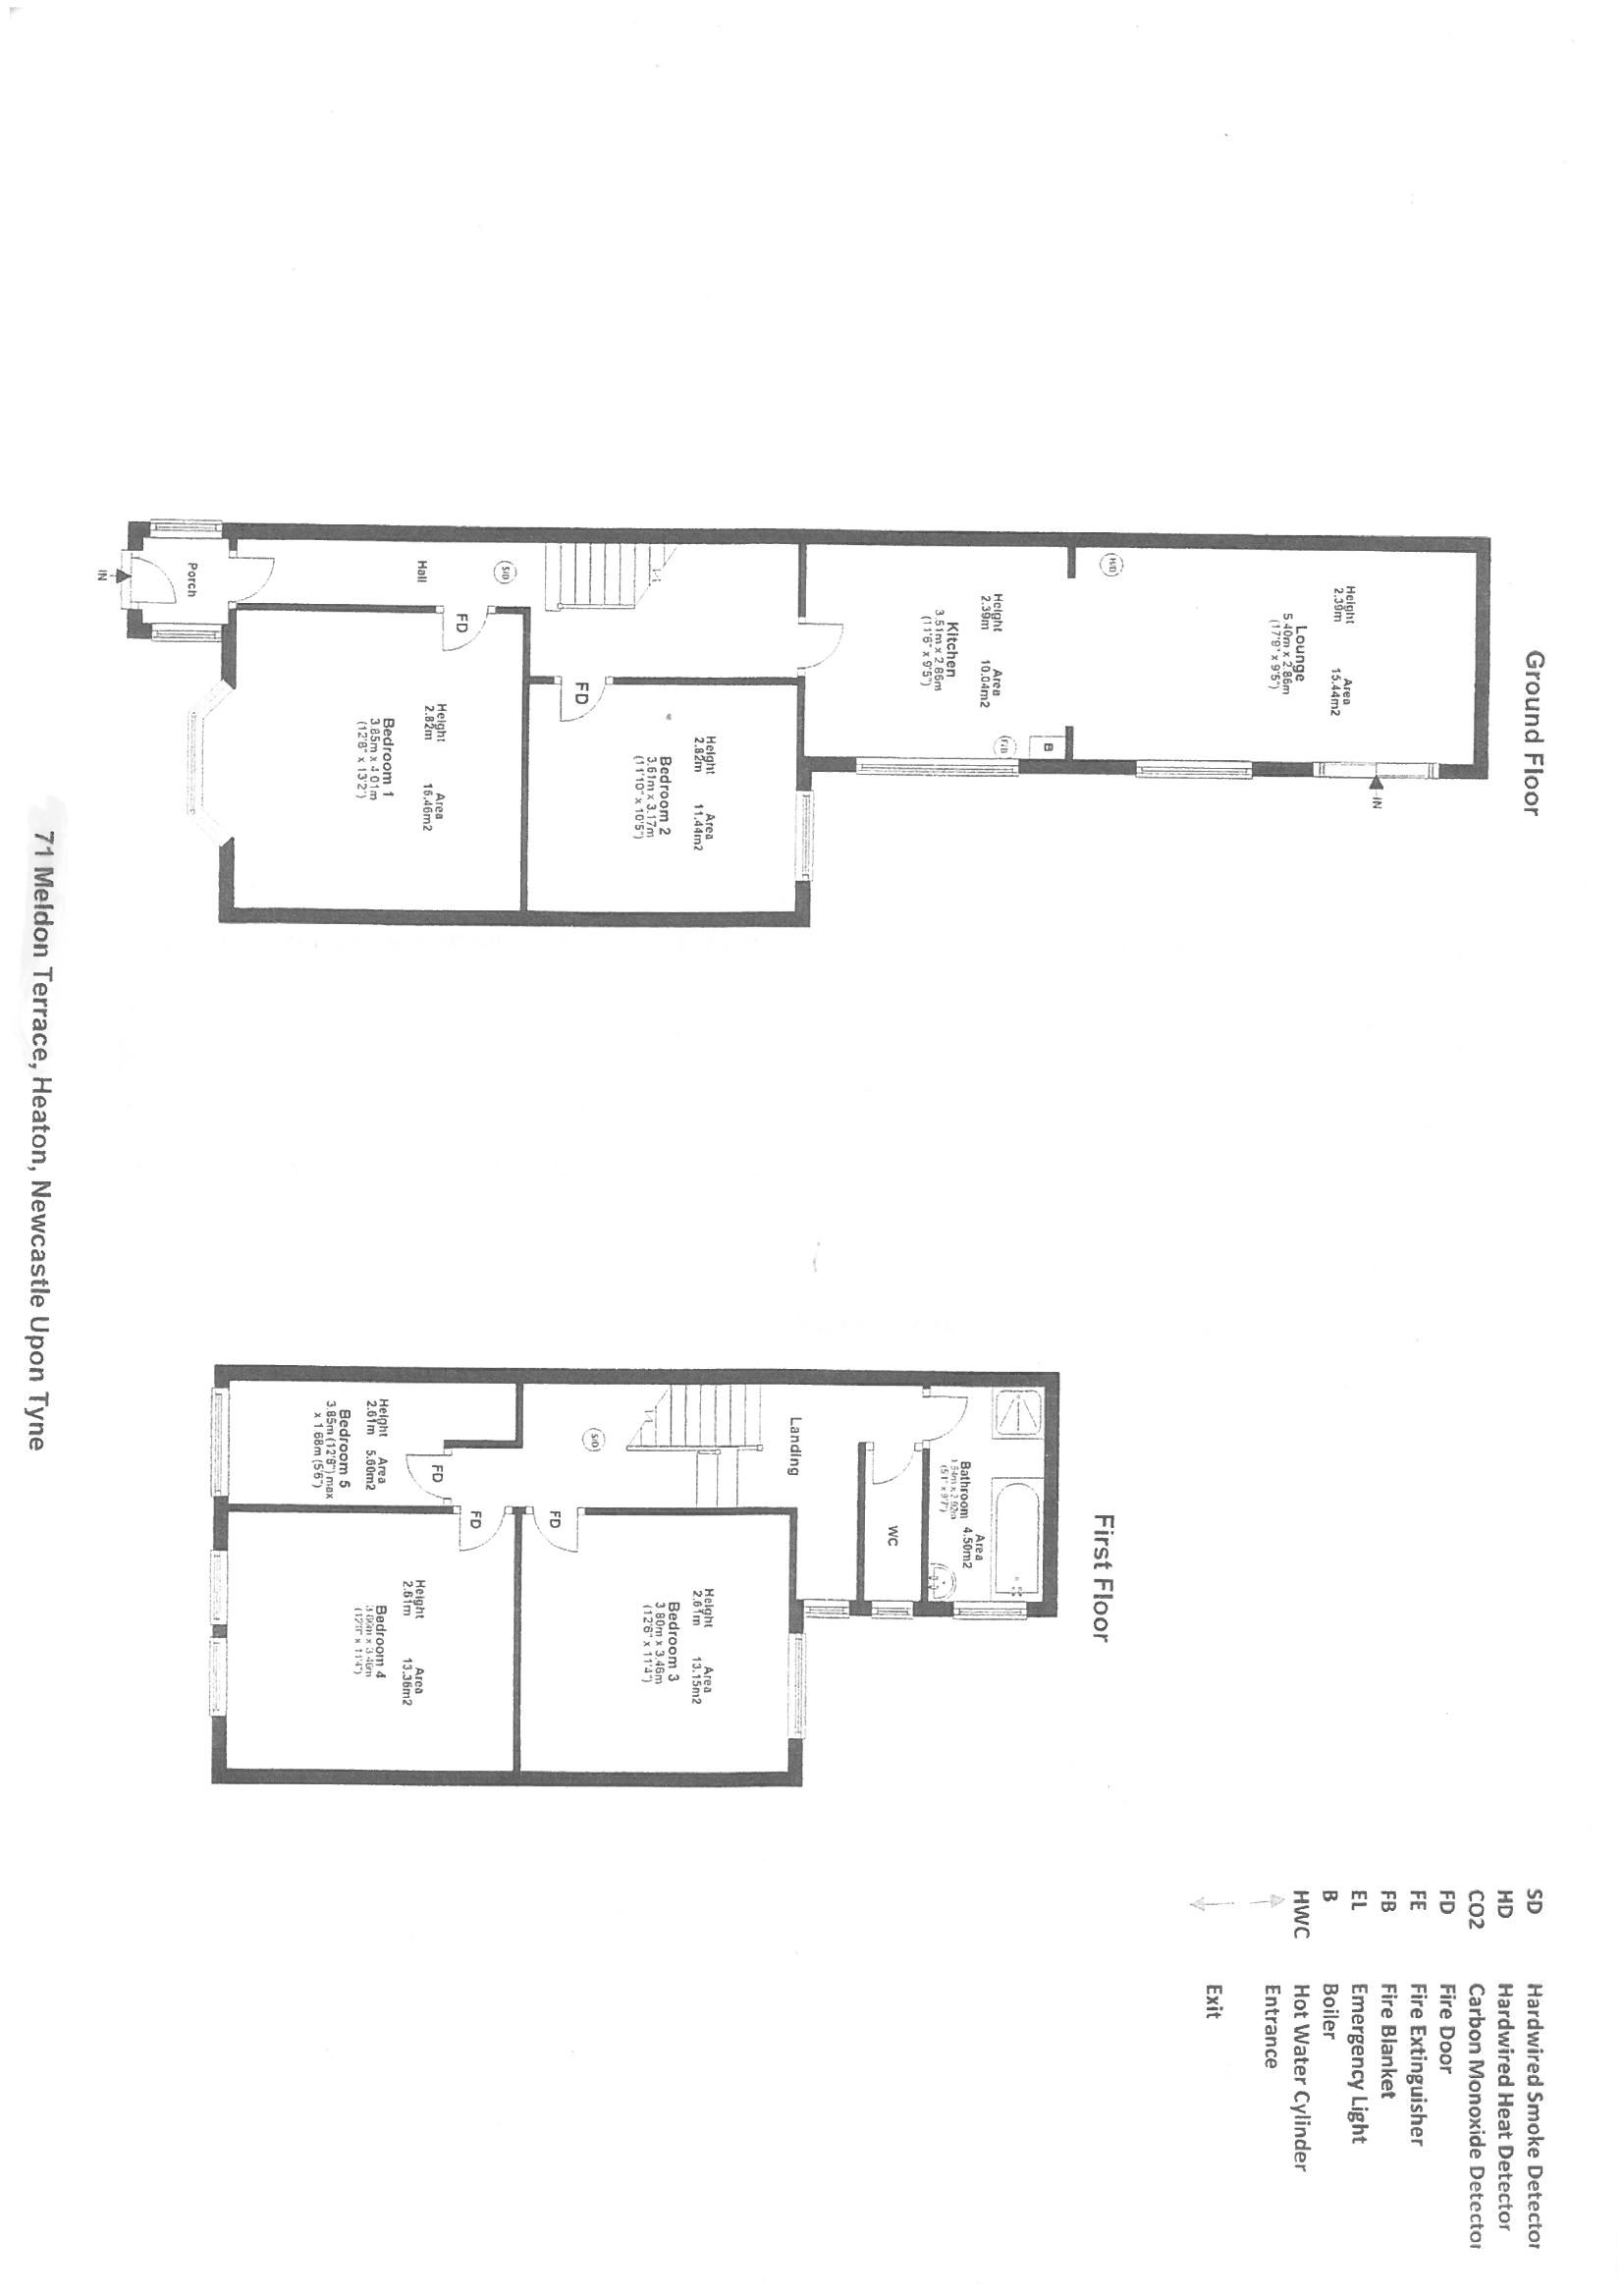 4 bed terraced house to rent in Meldon Terrace, Newcastle upon tyne - Property floorplan